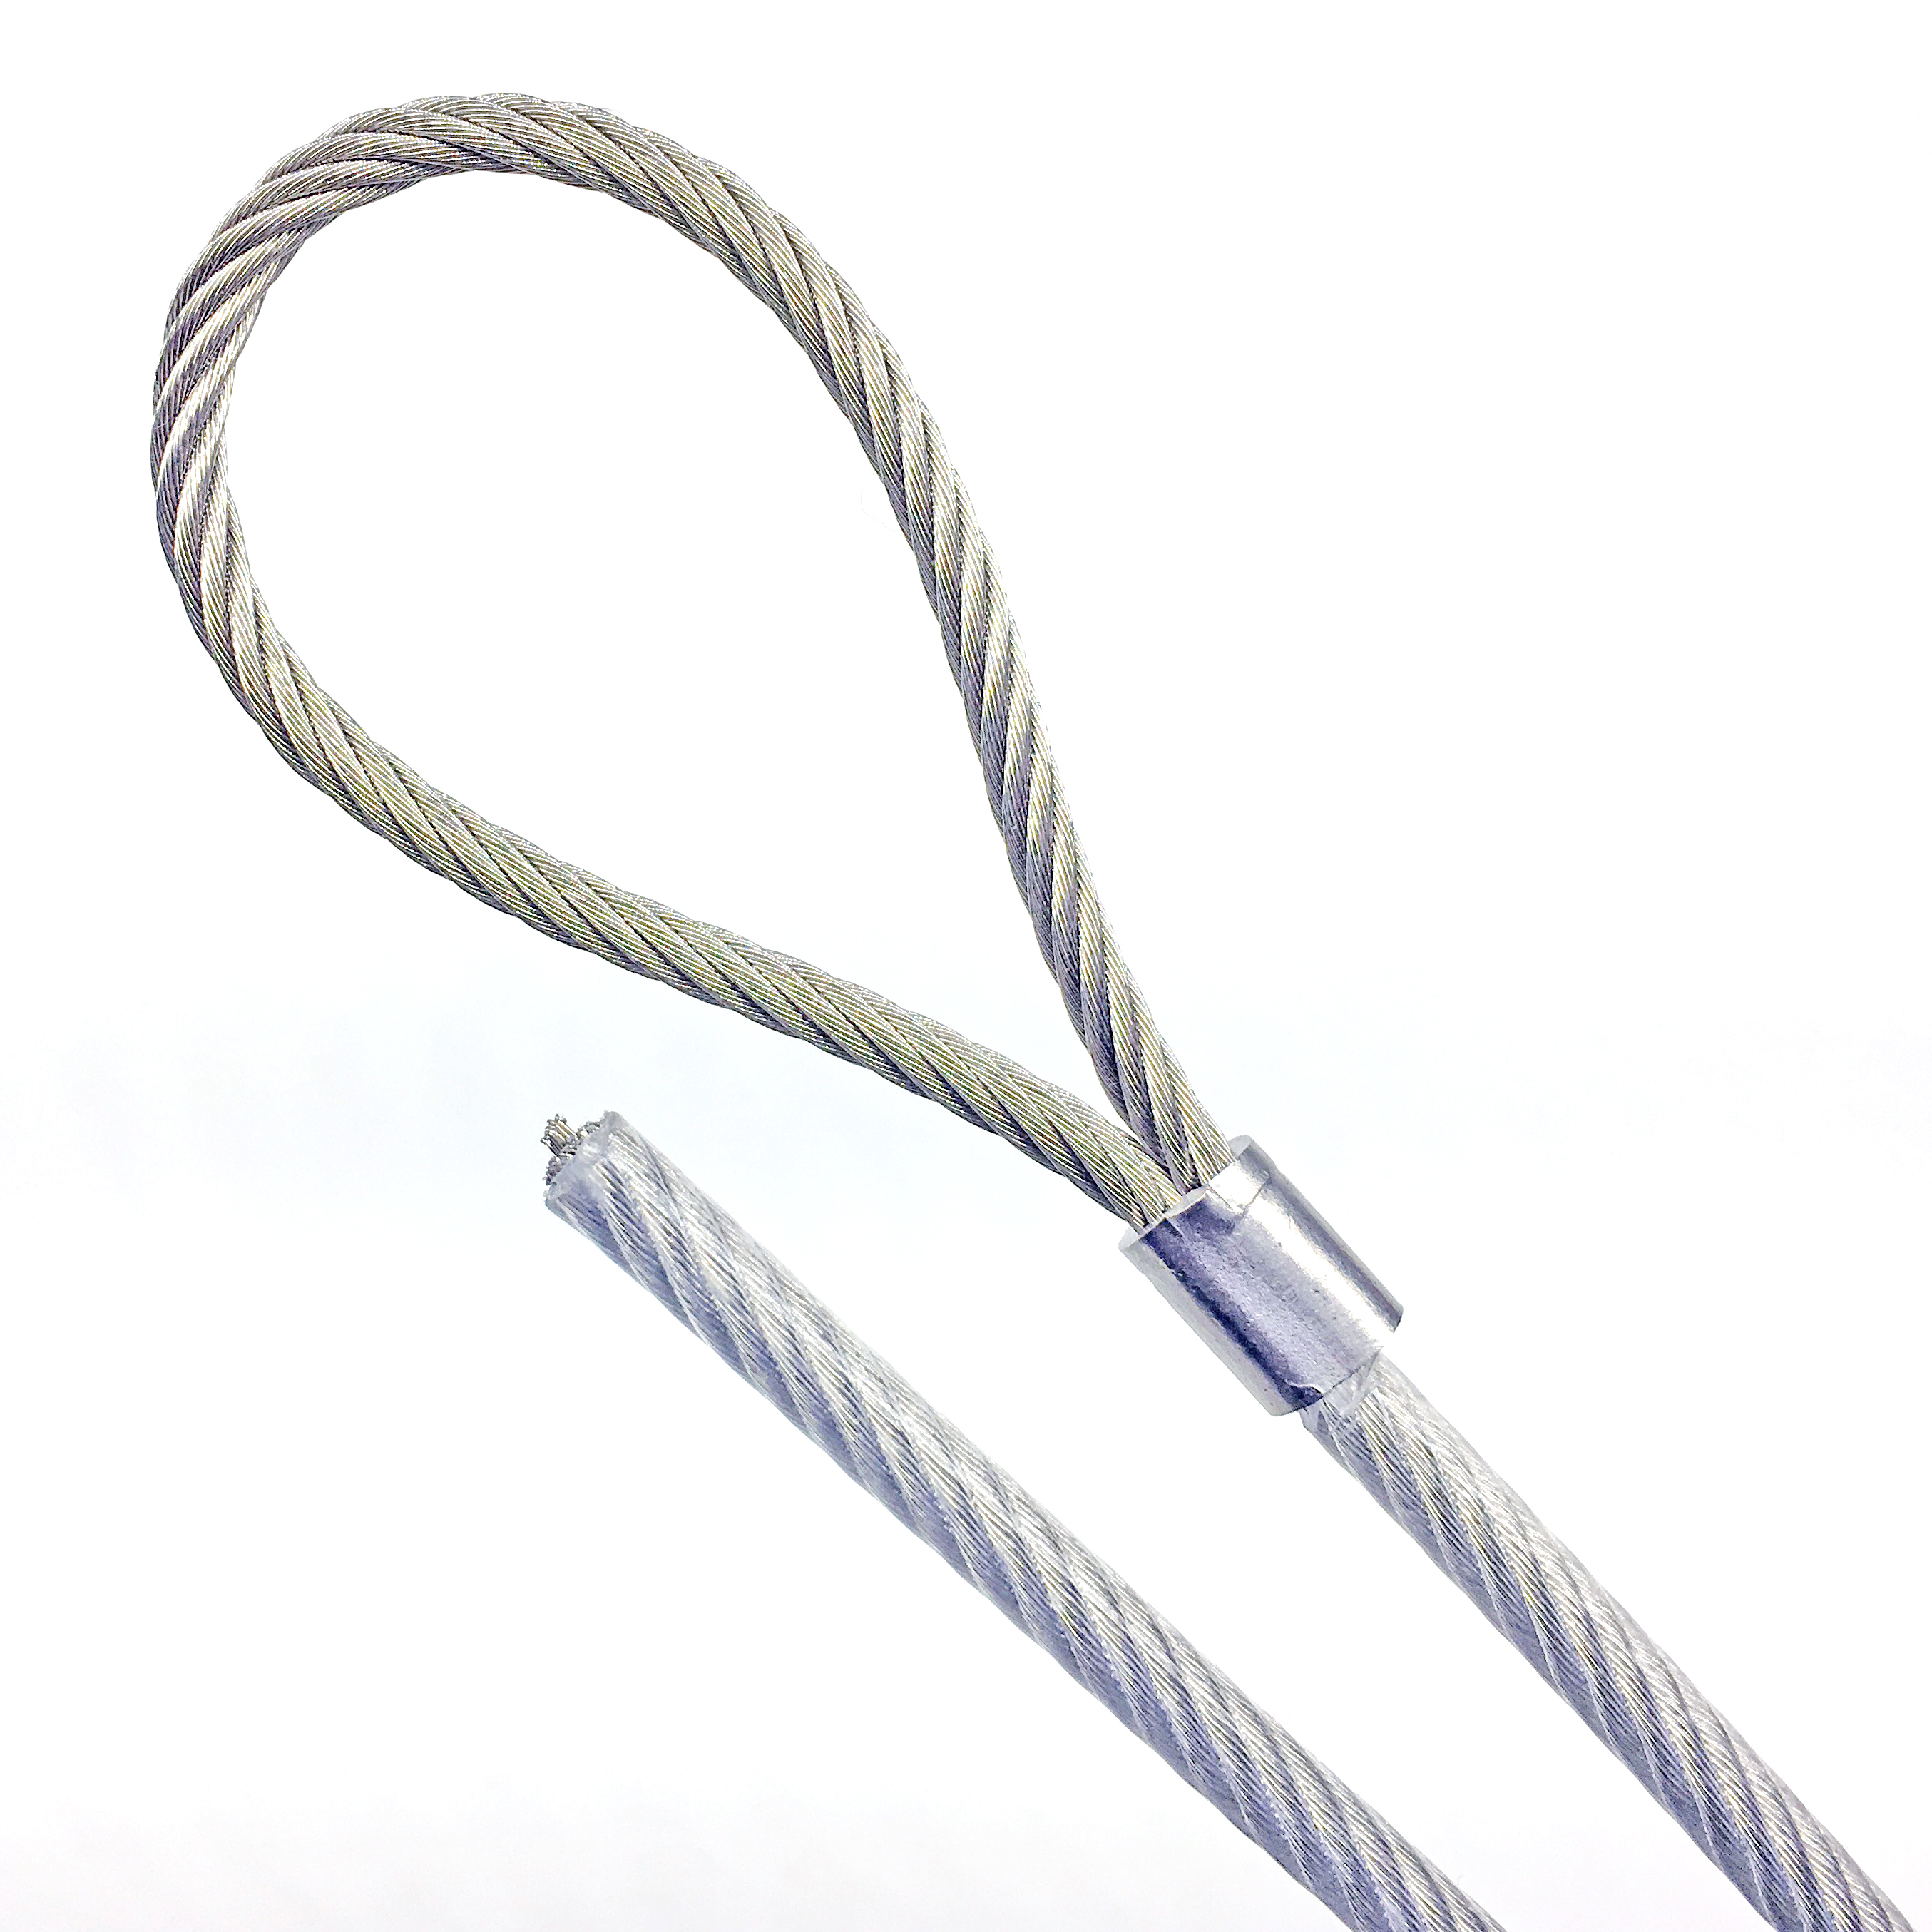 Stainless Steel Braided Cable 1/8" Coated to 3/16" 7x19 Strand Core 3 16 Coated Stainless Steel Cable